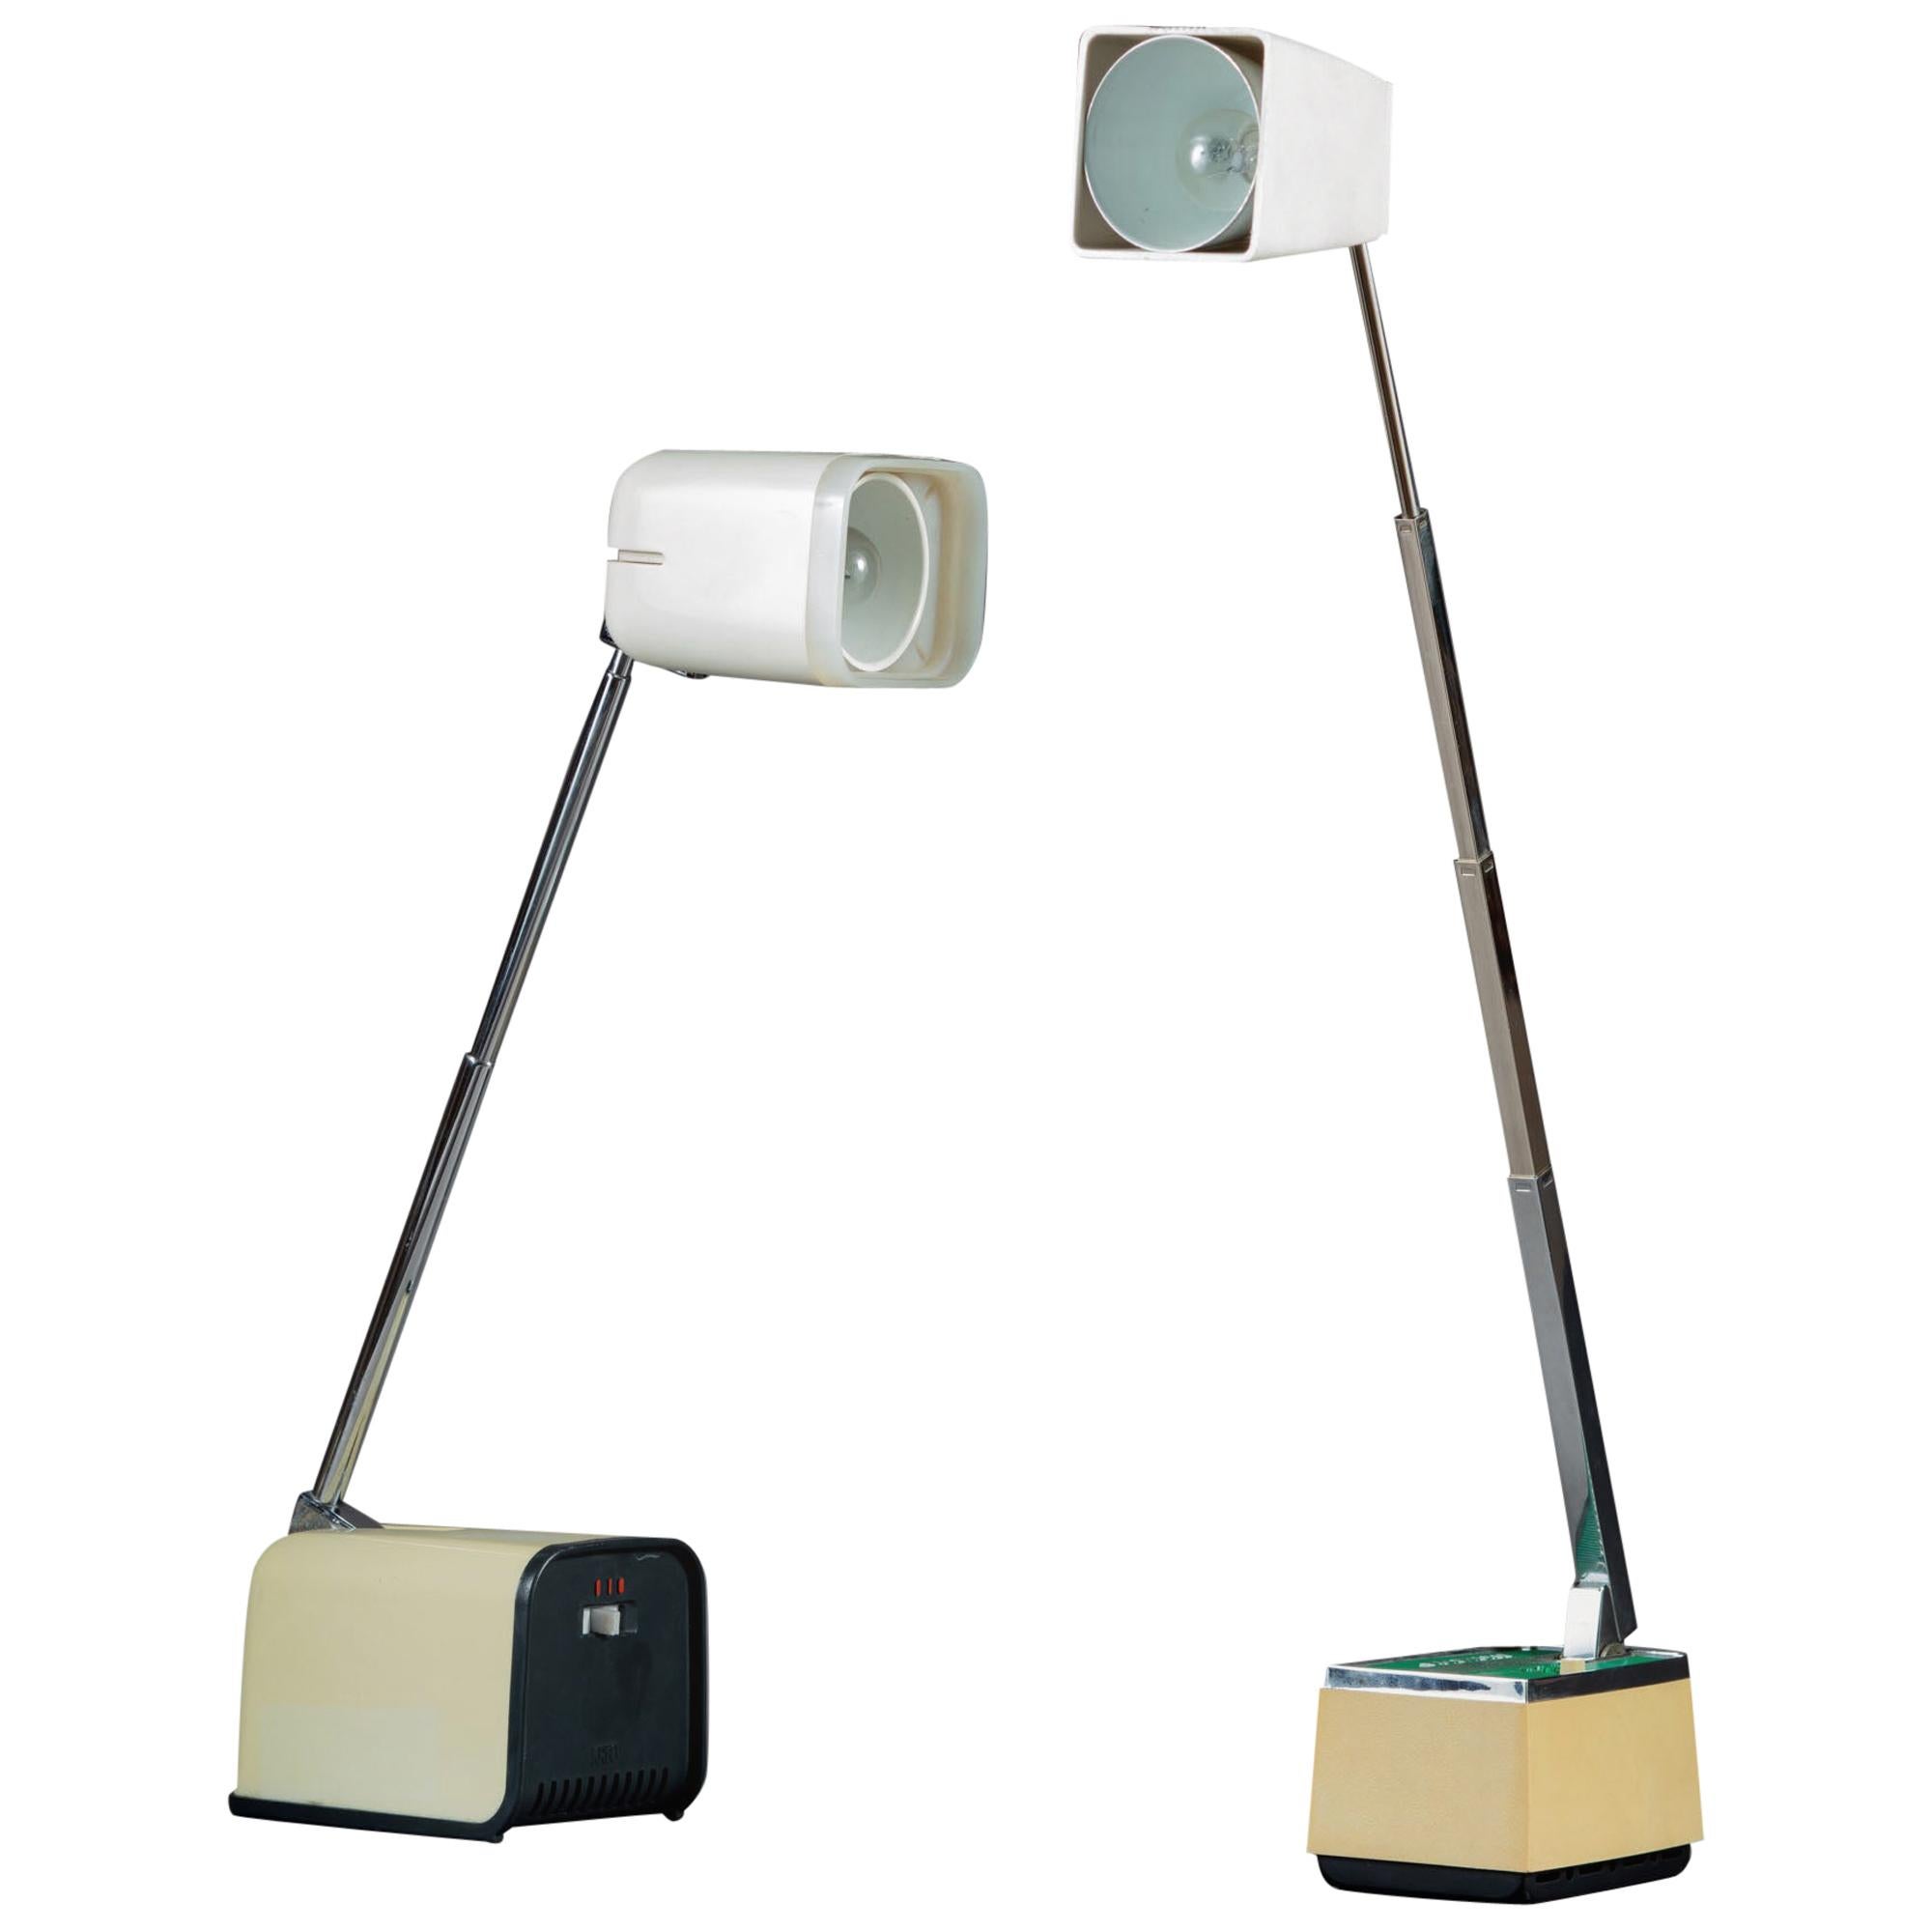 Two 1970s Microlite Collapsible and Folding Desk Lamps with Polished Steel Stems